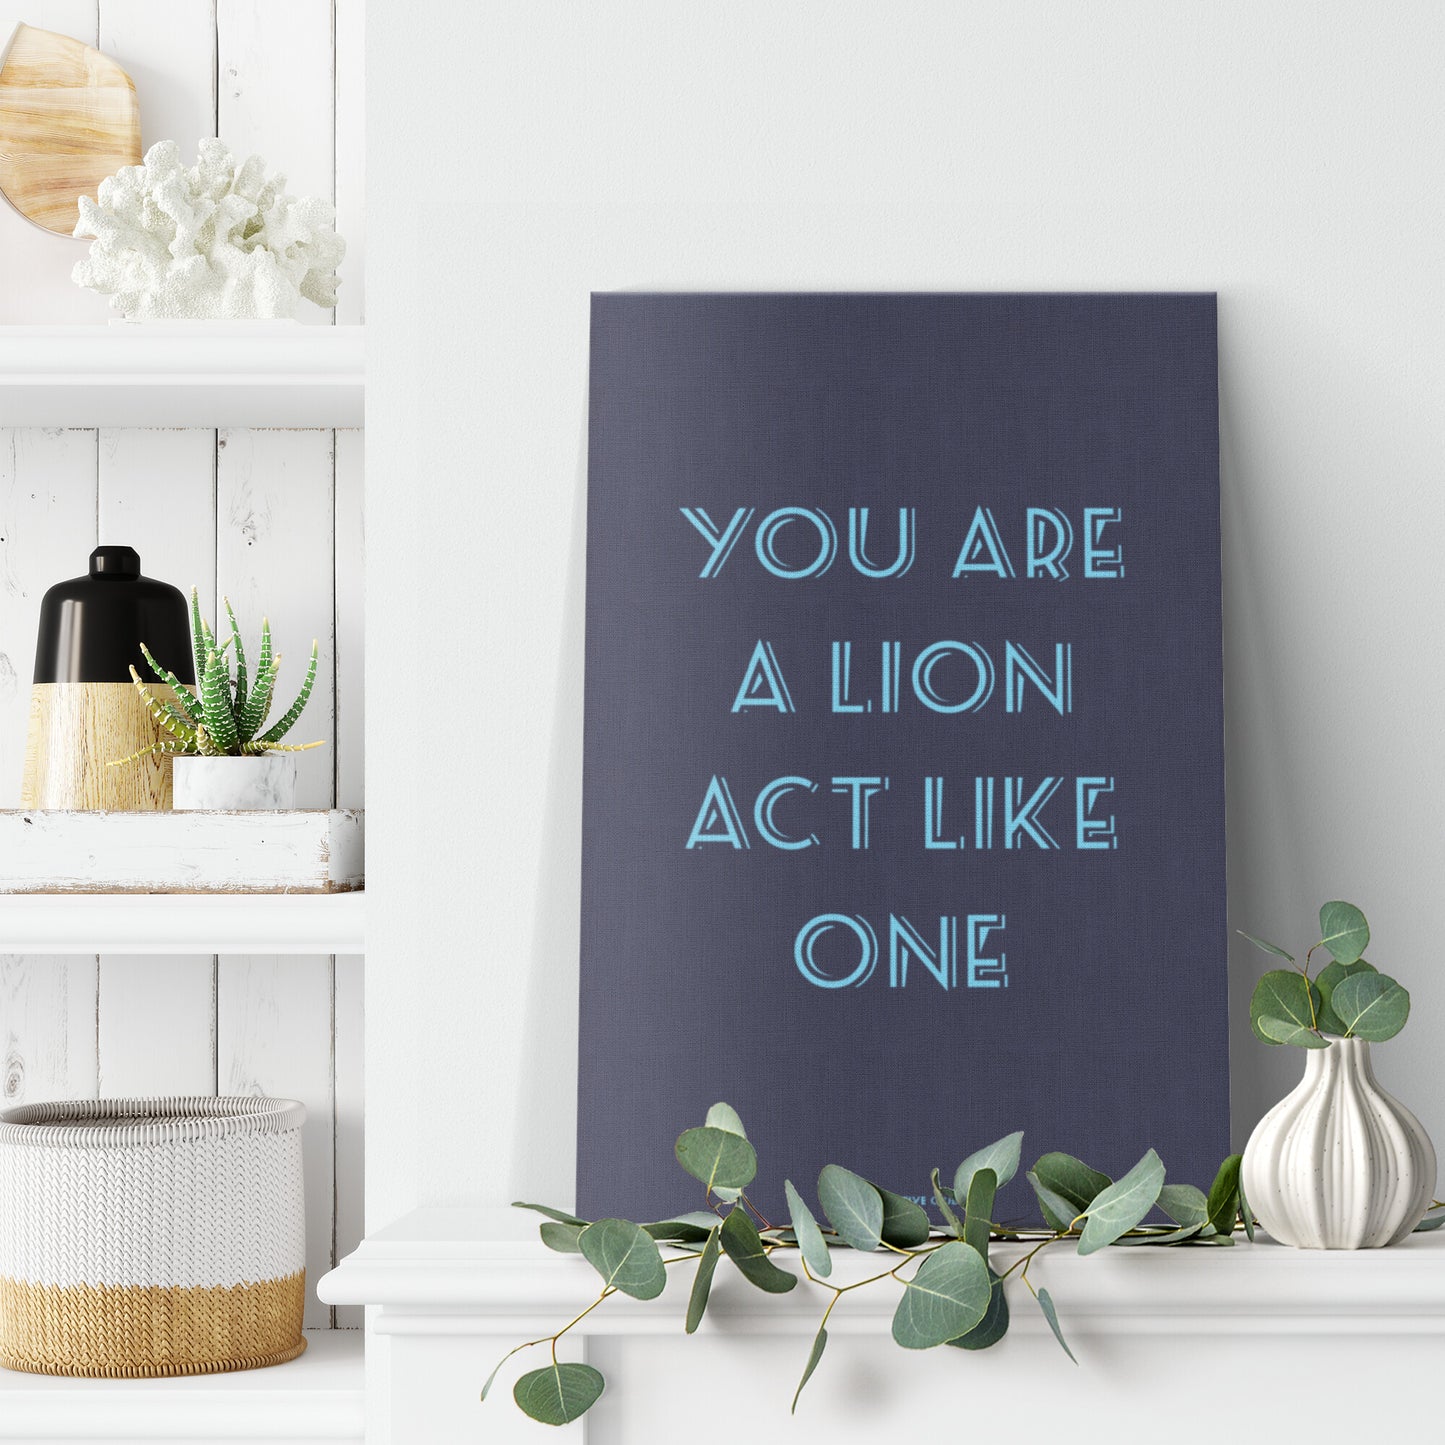 YOU ARE A LION ACT LIKE ONE